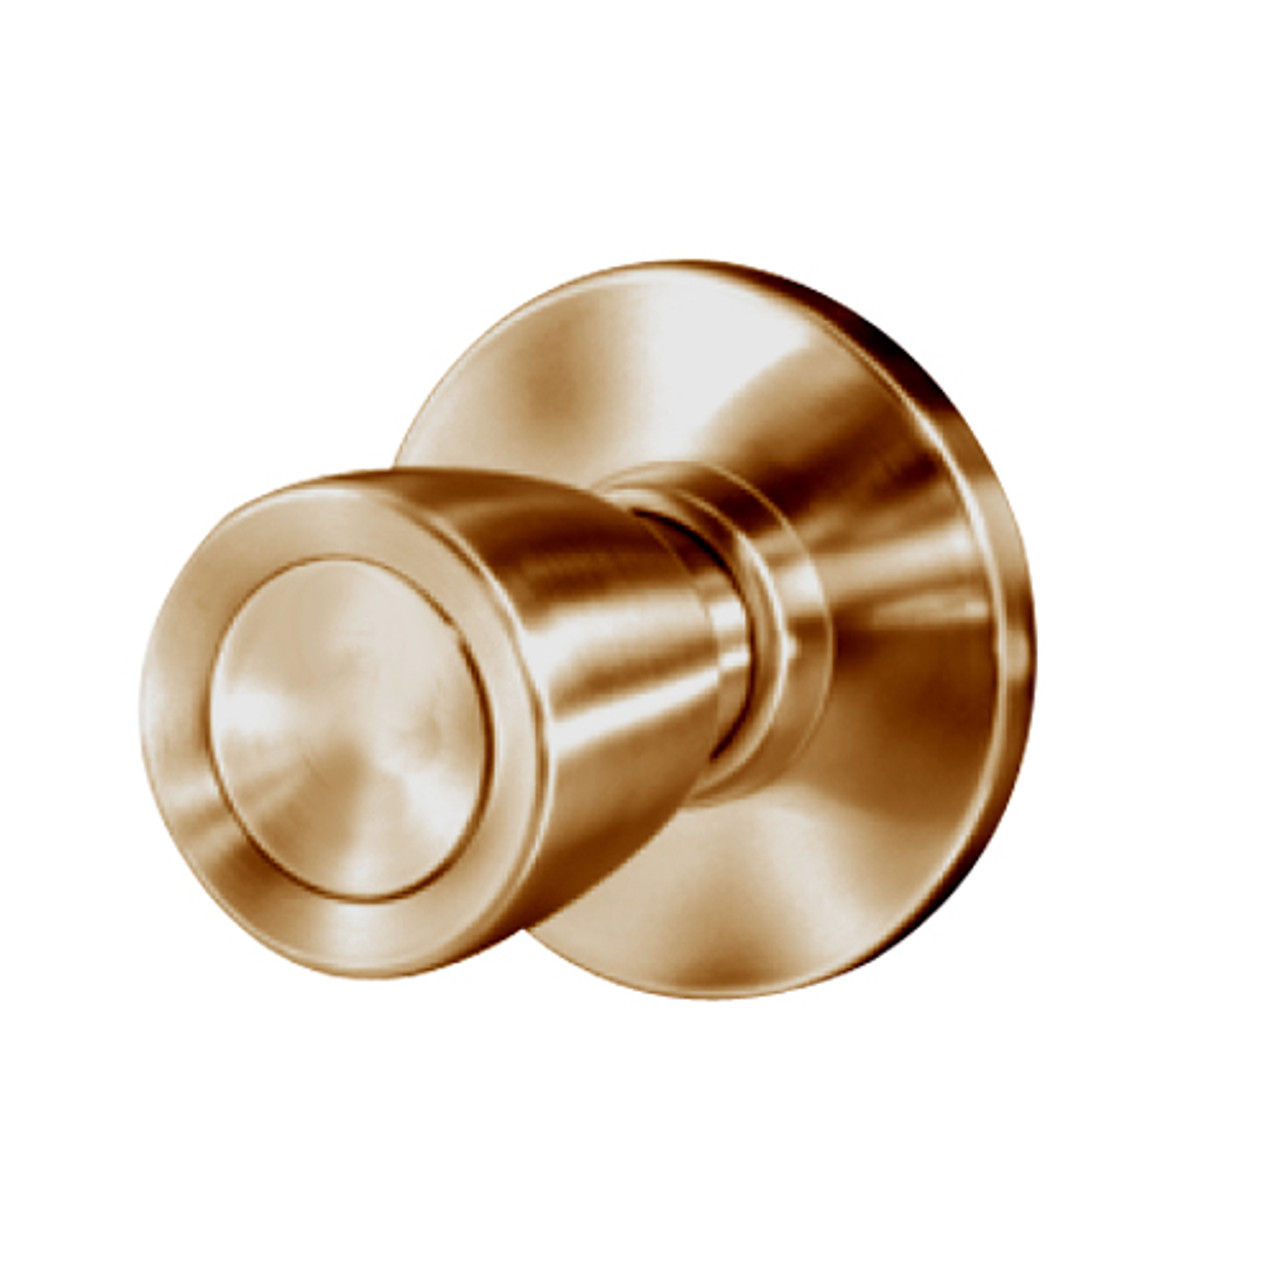 8K30Q6AS3612 Best 8K Series Exit Heavy Duty Cylindrical Knob Locks with Tulip Style in Satin Bronze